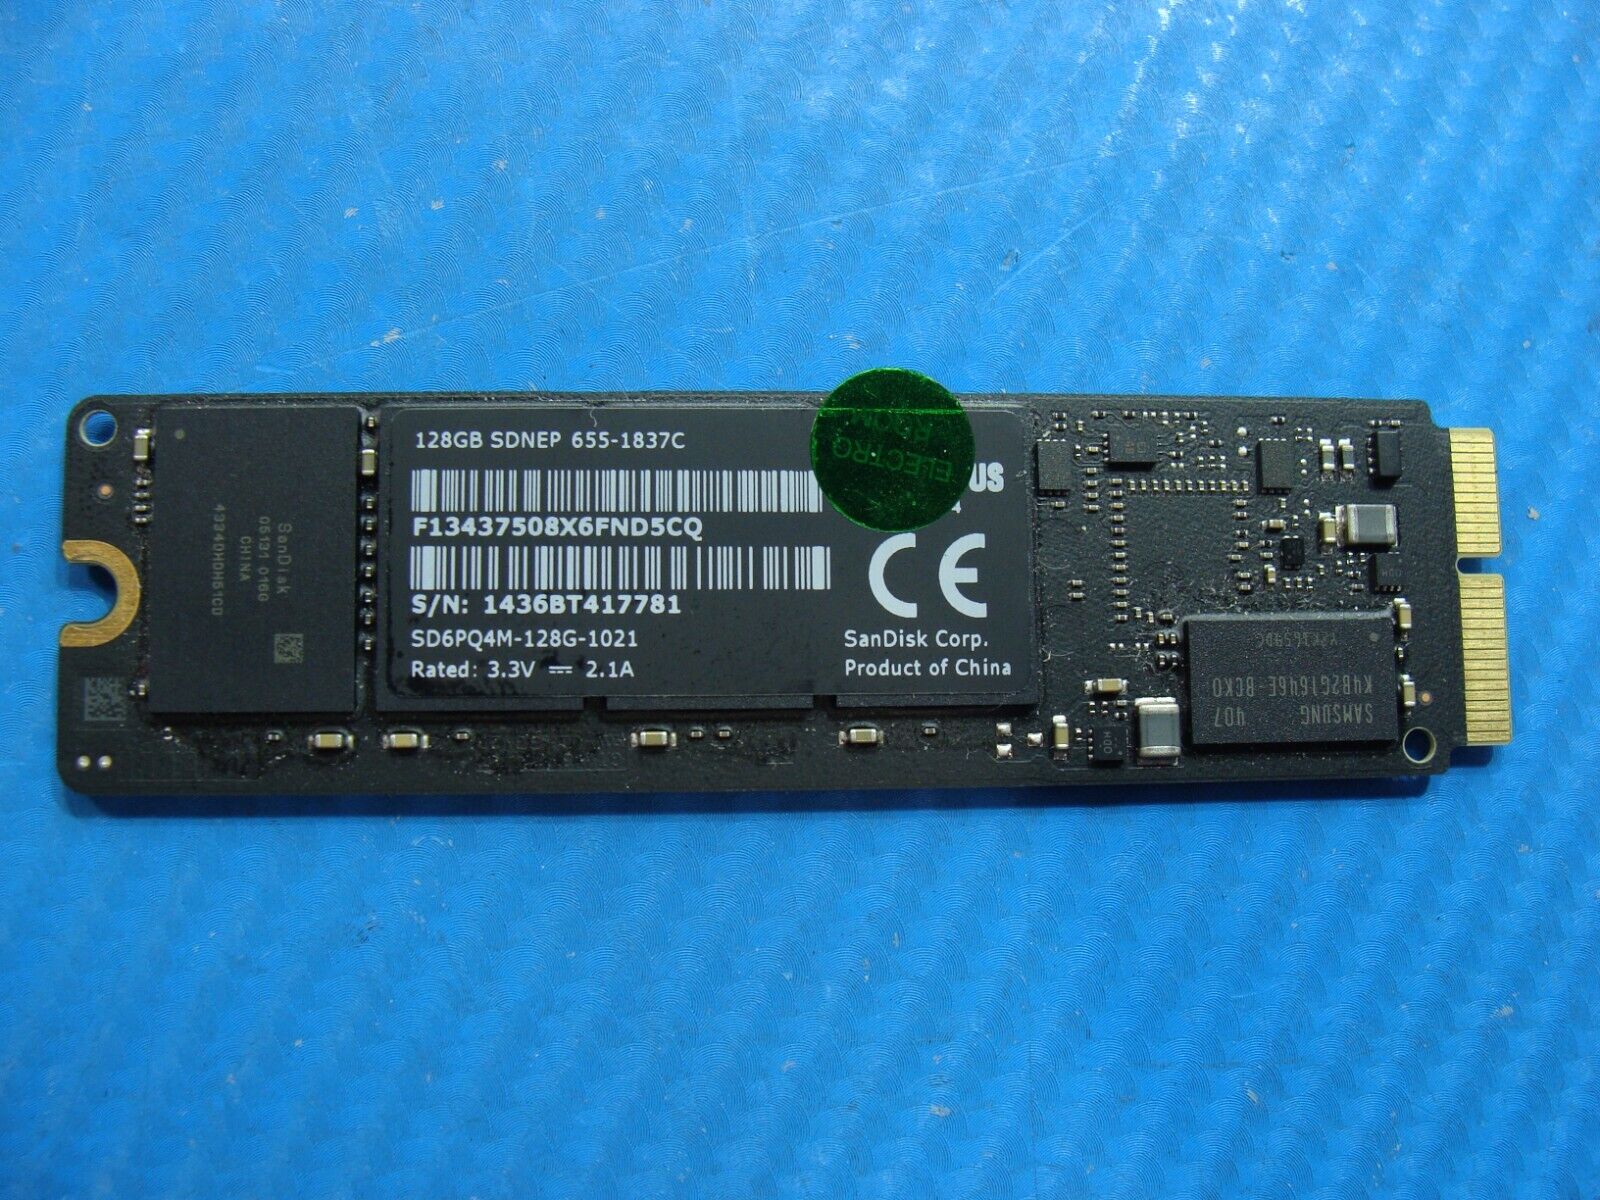 MacBook A1466 SanDisk 128GB SSD Solid State Drive SD6PQ4M-128G-1021 655-1837C